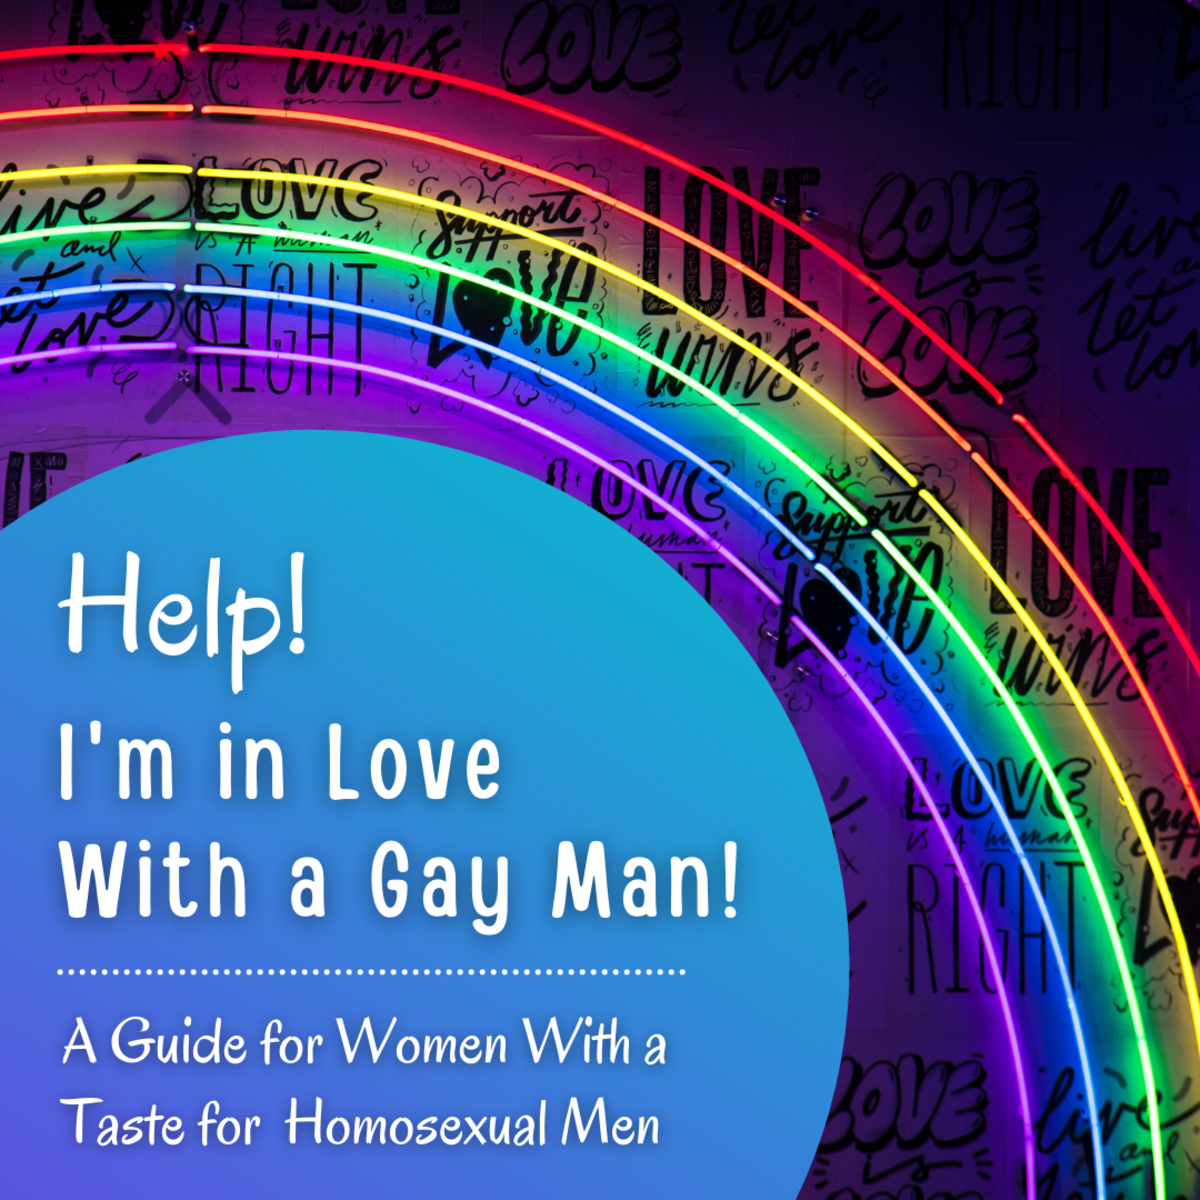 Help! I'm in Love With a Gay Man! (What to Do When You're a Woman With a Taste for Gay Guys)